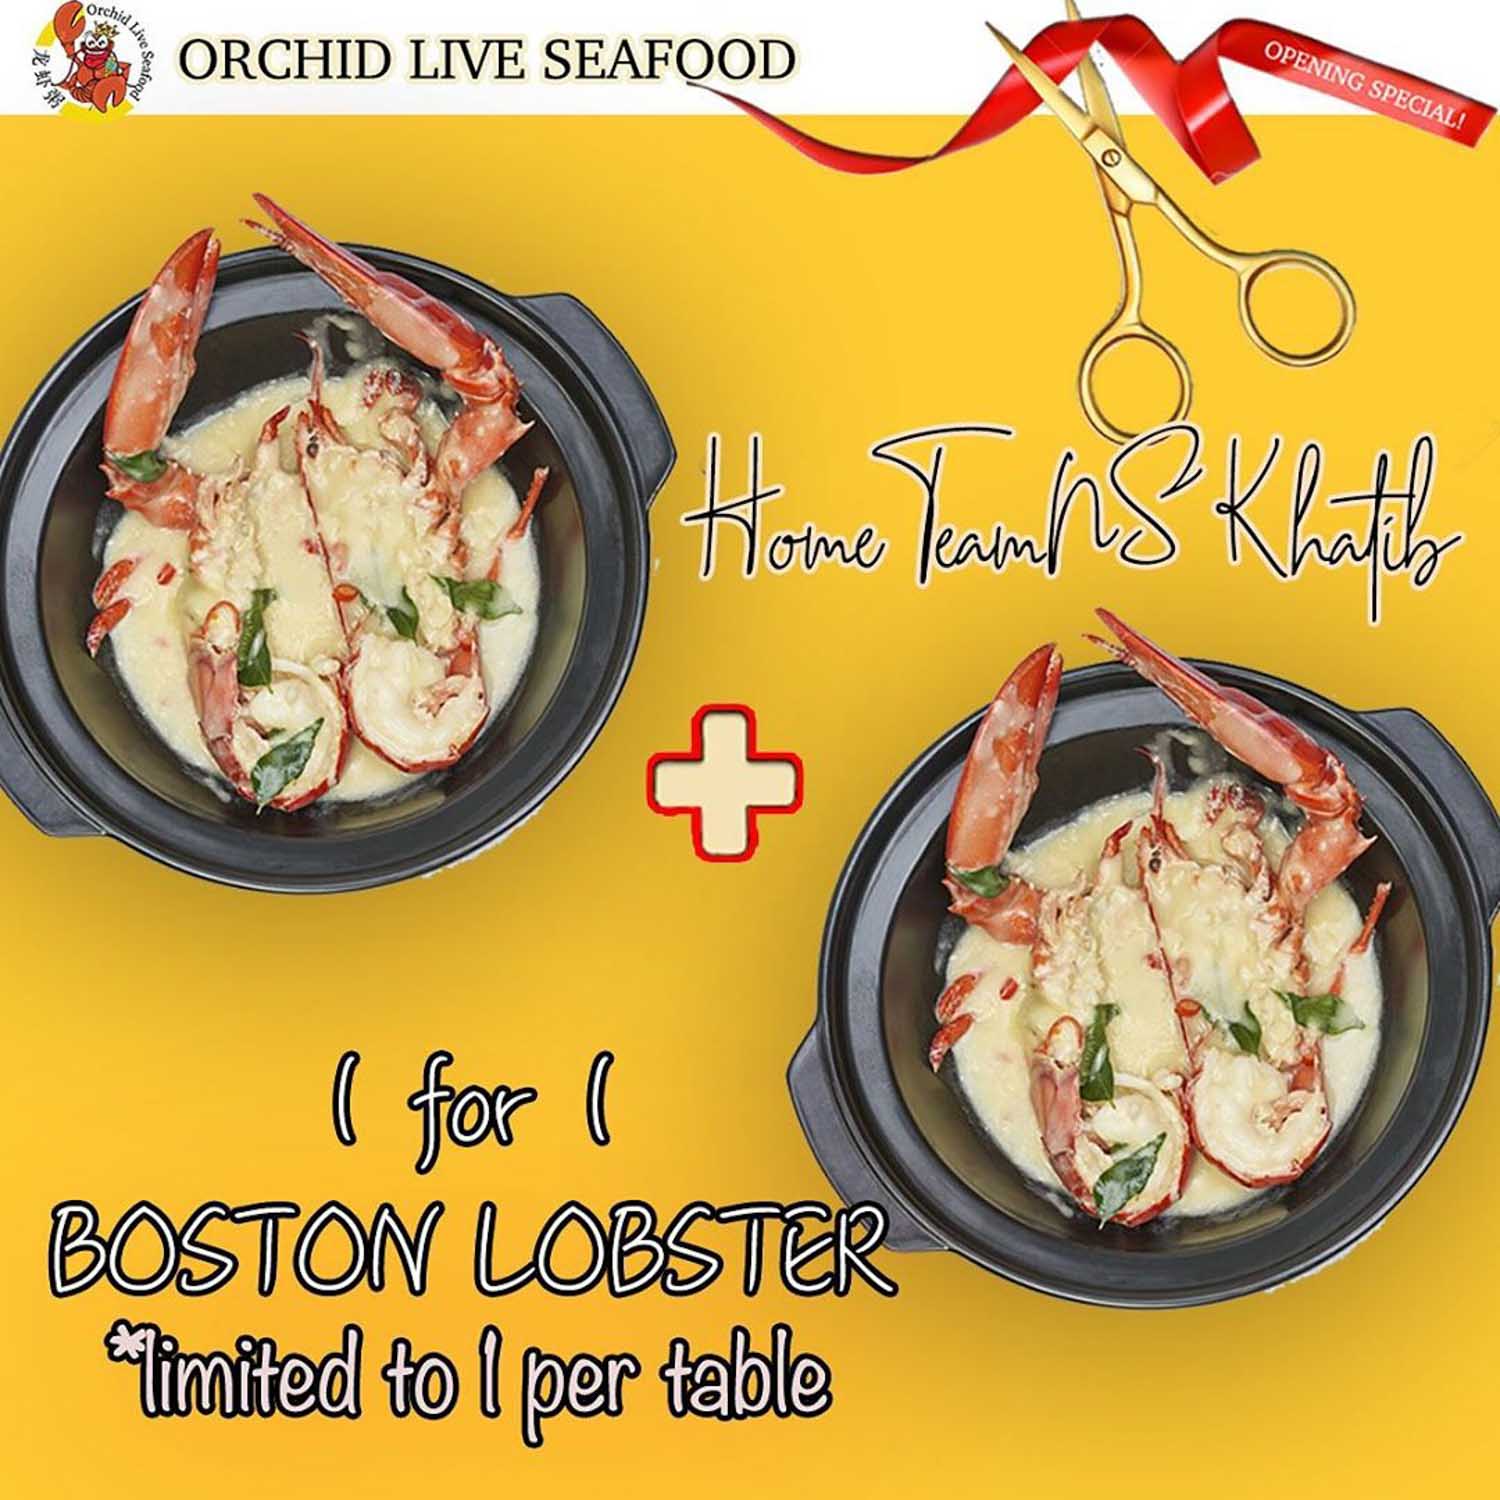 1-for-1 boston lobster - 1-for-1 khatib orchid live seafood restaurant